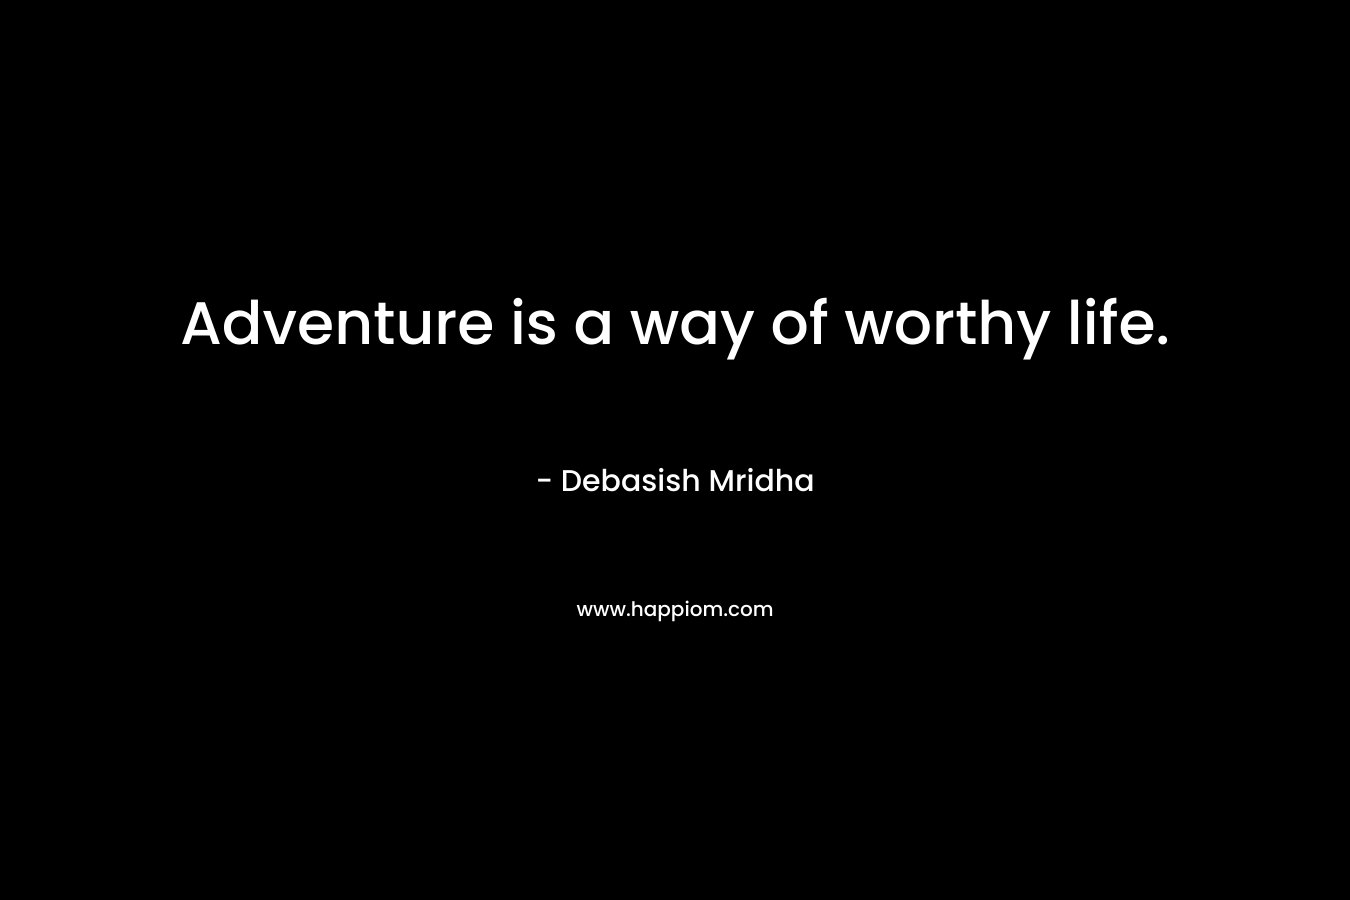 Adventure is a way of worthy life.